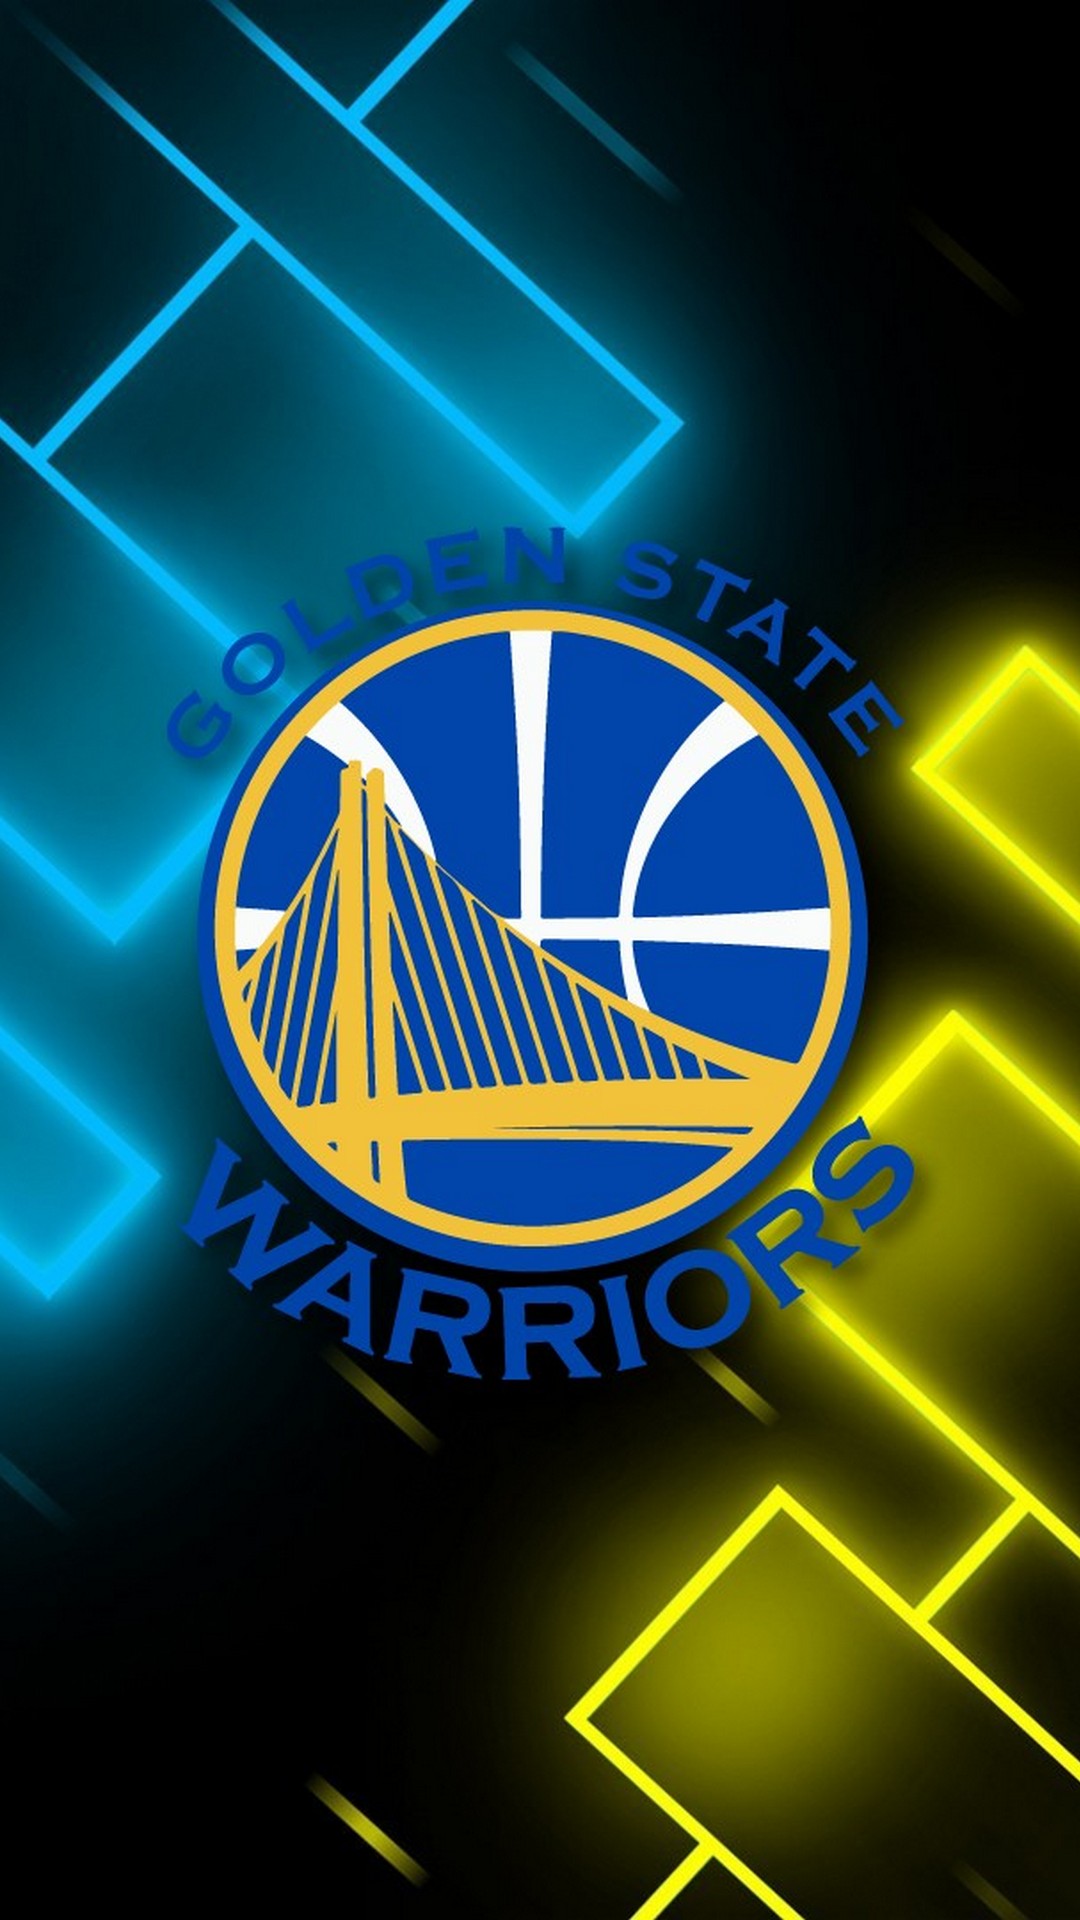 Golden State Warriors Iphone 6 Wallpaper With Image - Golden State Warriors Wallpaper Hd - HD Wallpaper 